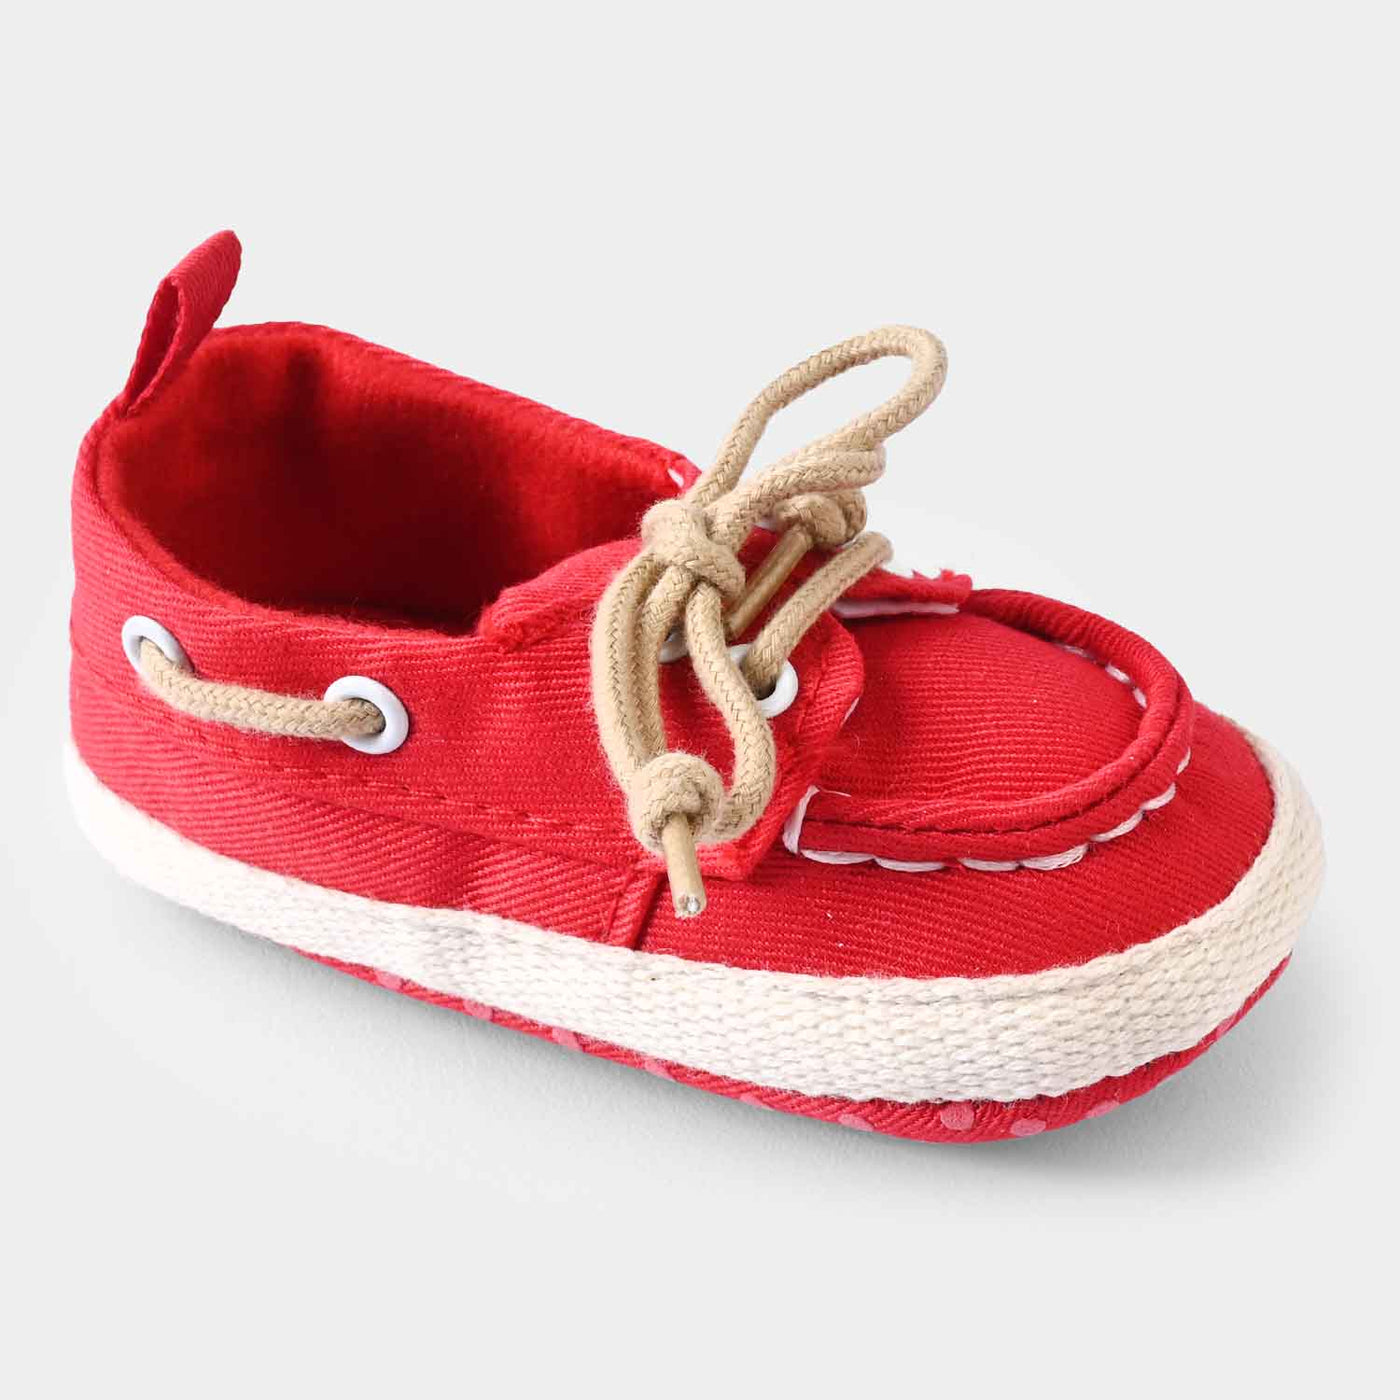 Baby Girl Shoes 634-Red